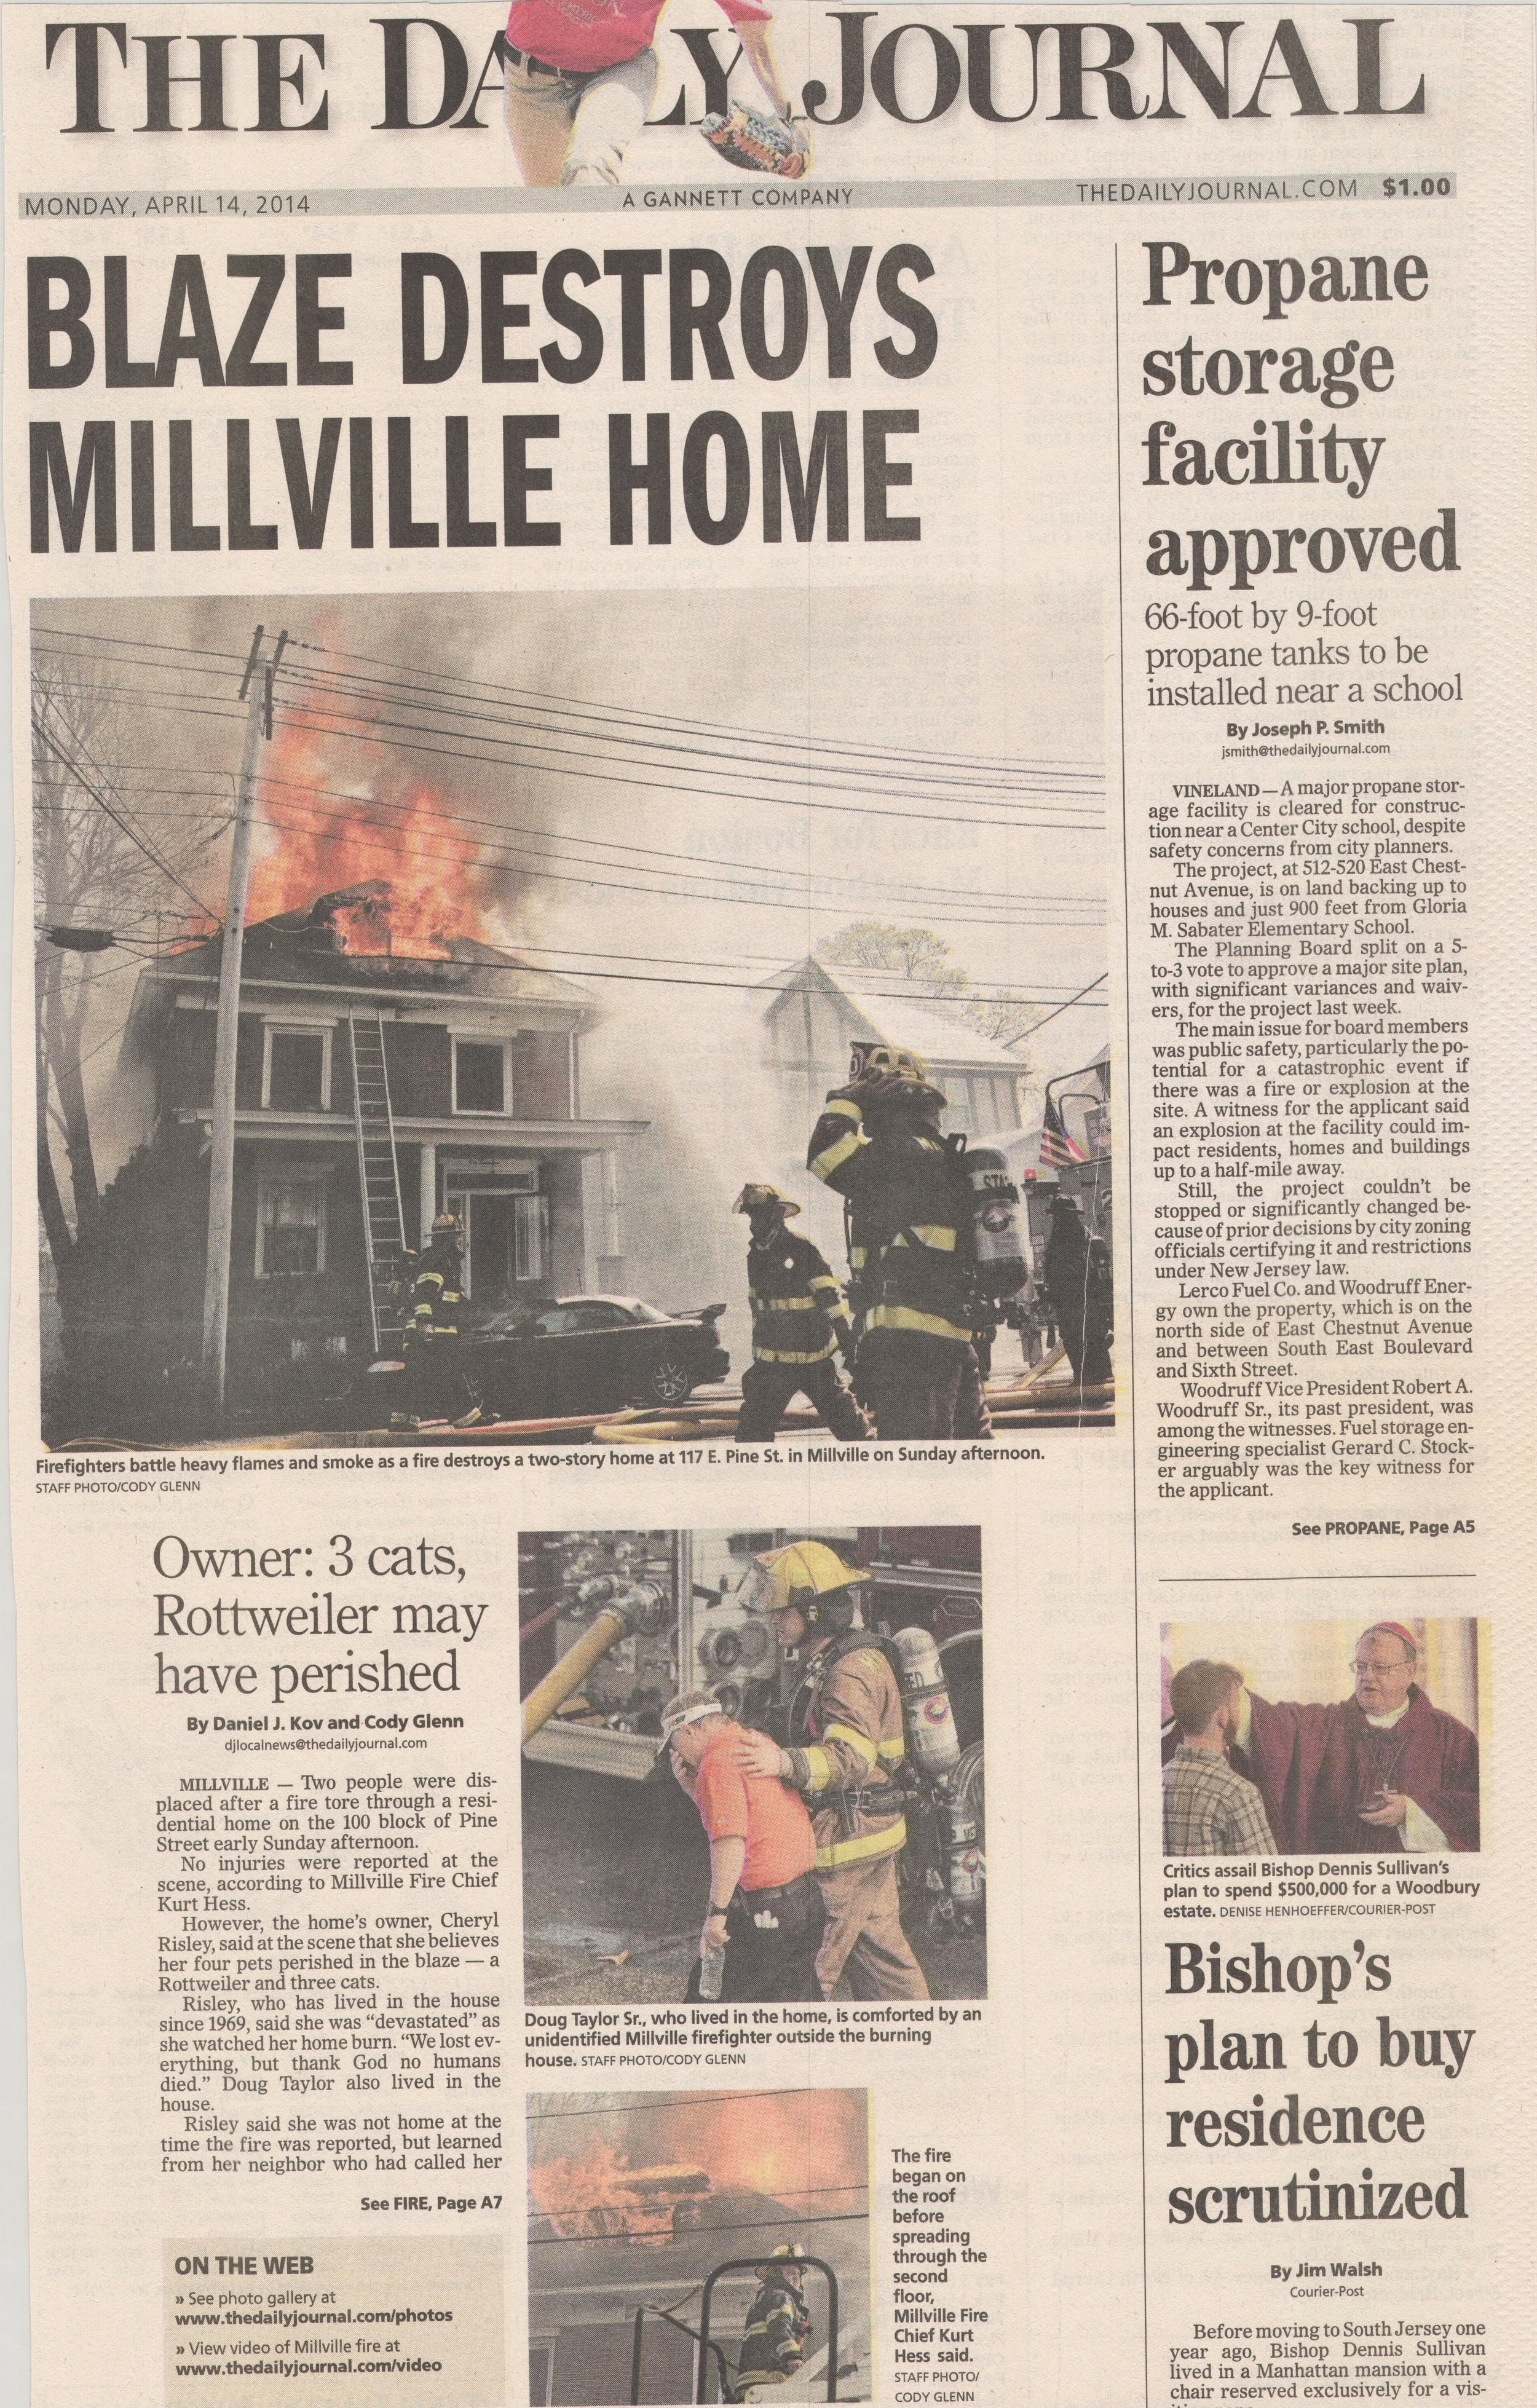  Millville house fire April 14, 2014 /  The Daily Journal  